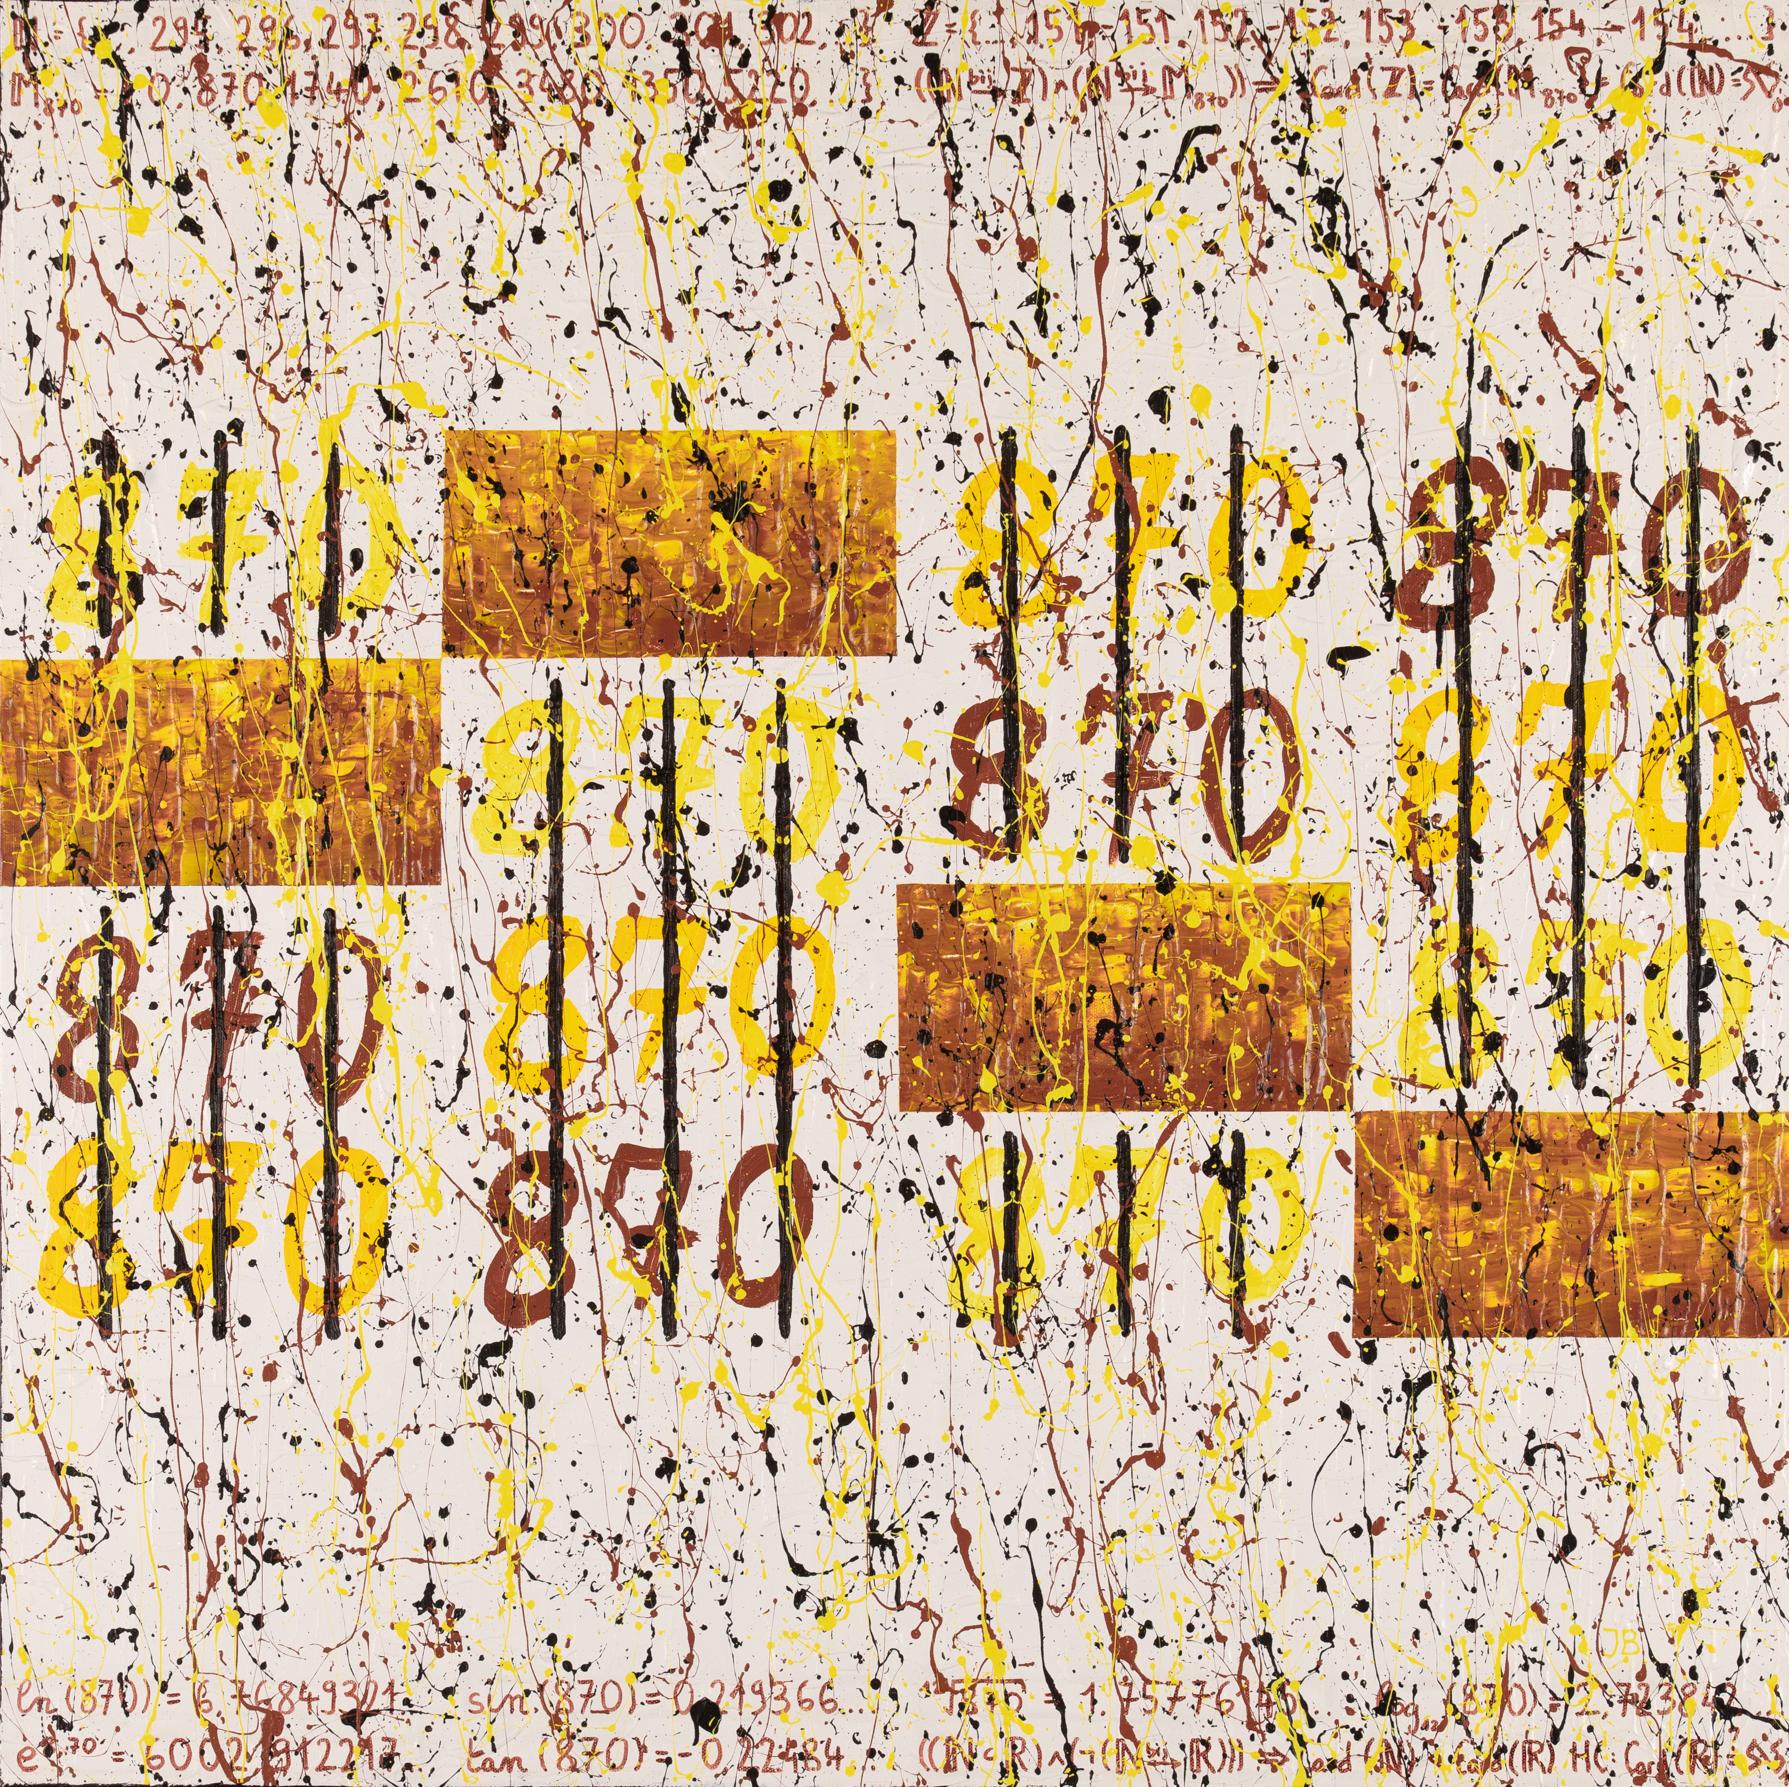 CANTORS' NUMBERS #875 - Painting by Jean-Claude Bossel 